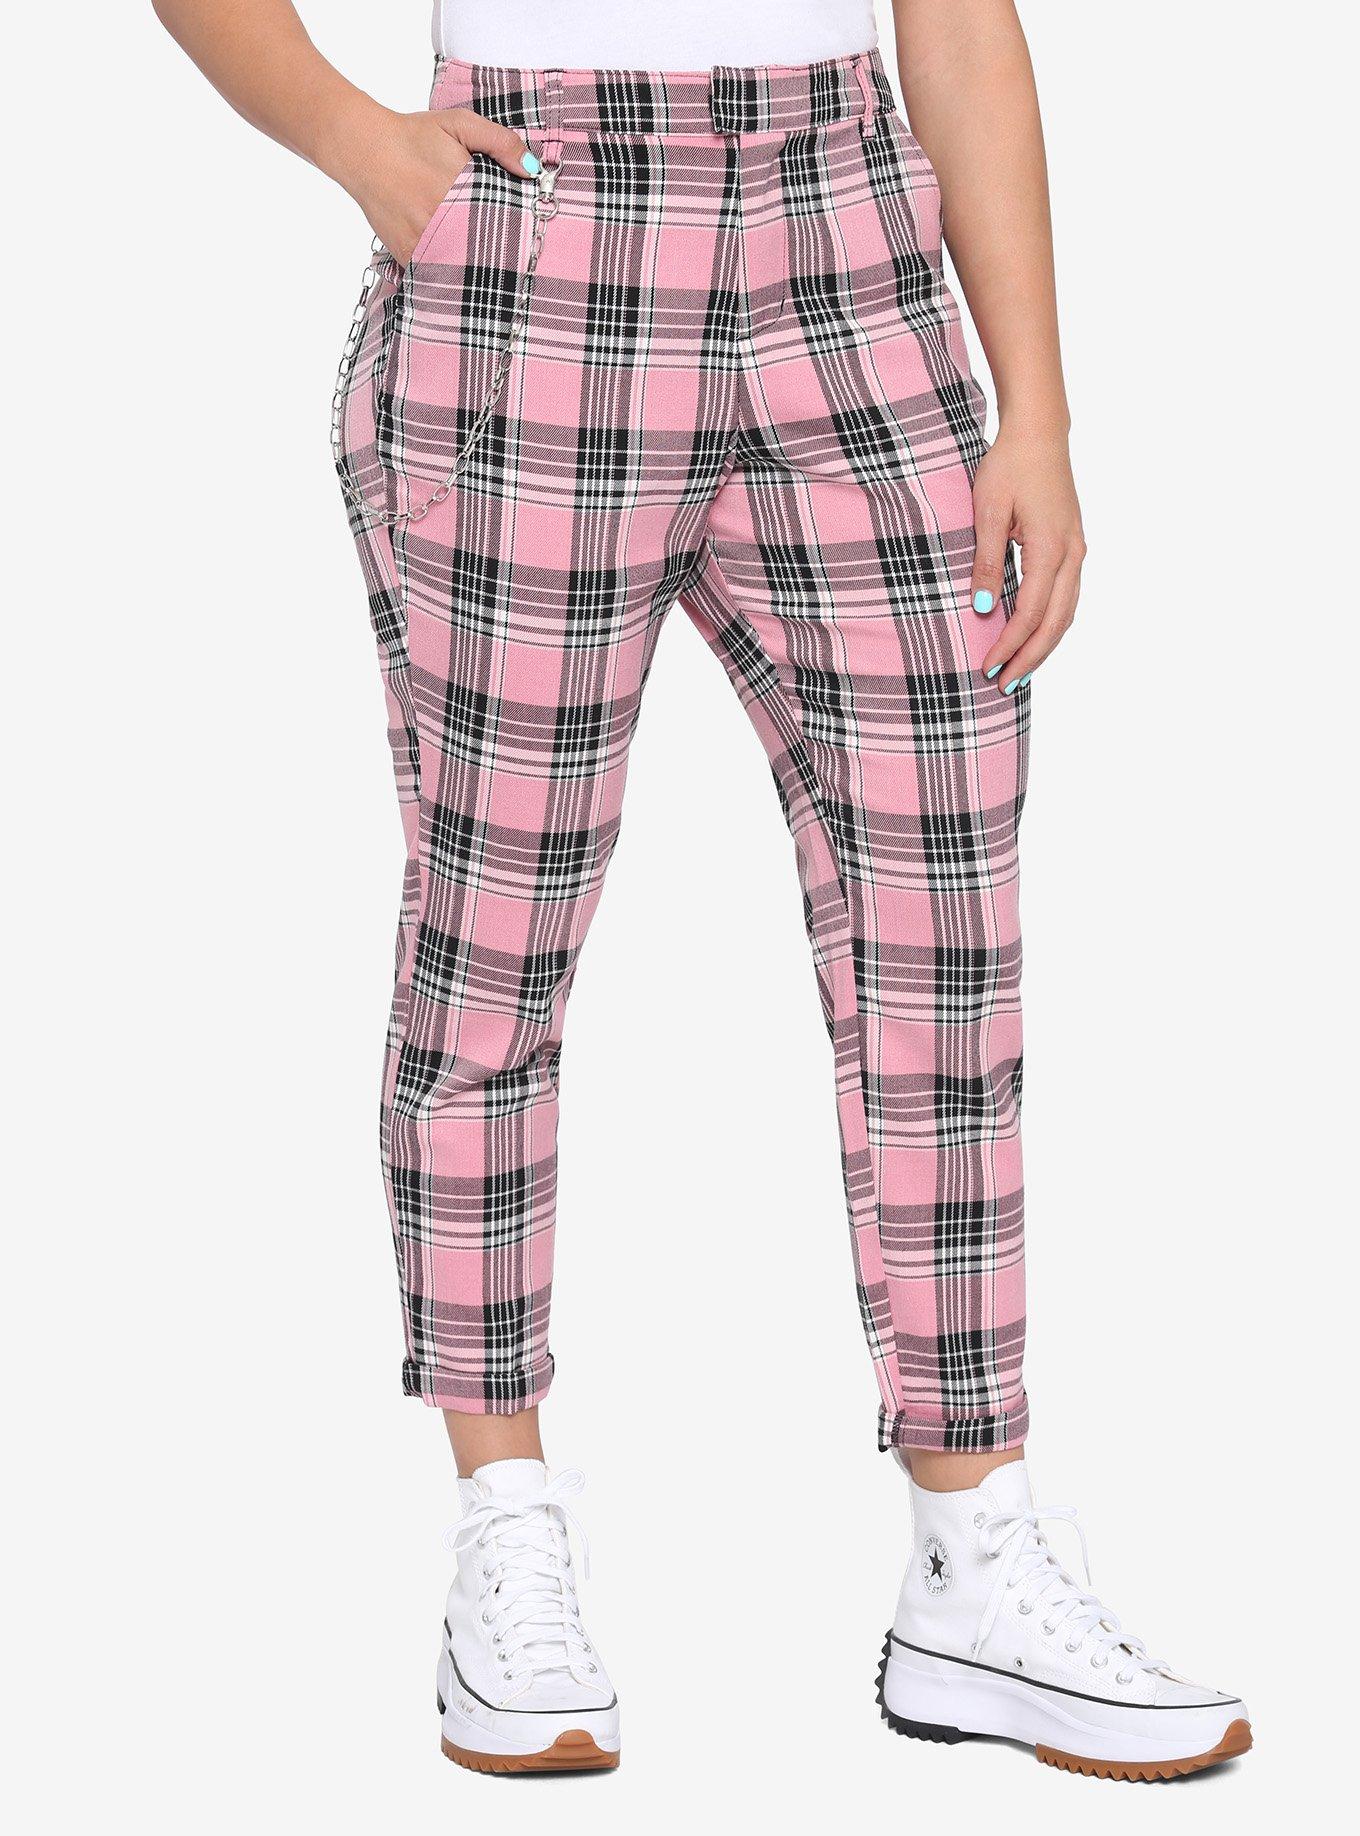 Red Plaid Pants With Detachable Chain